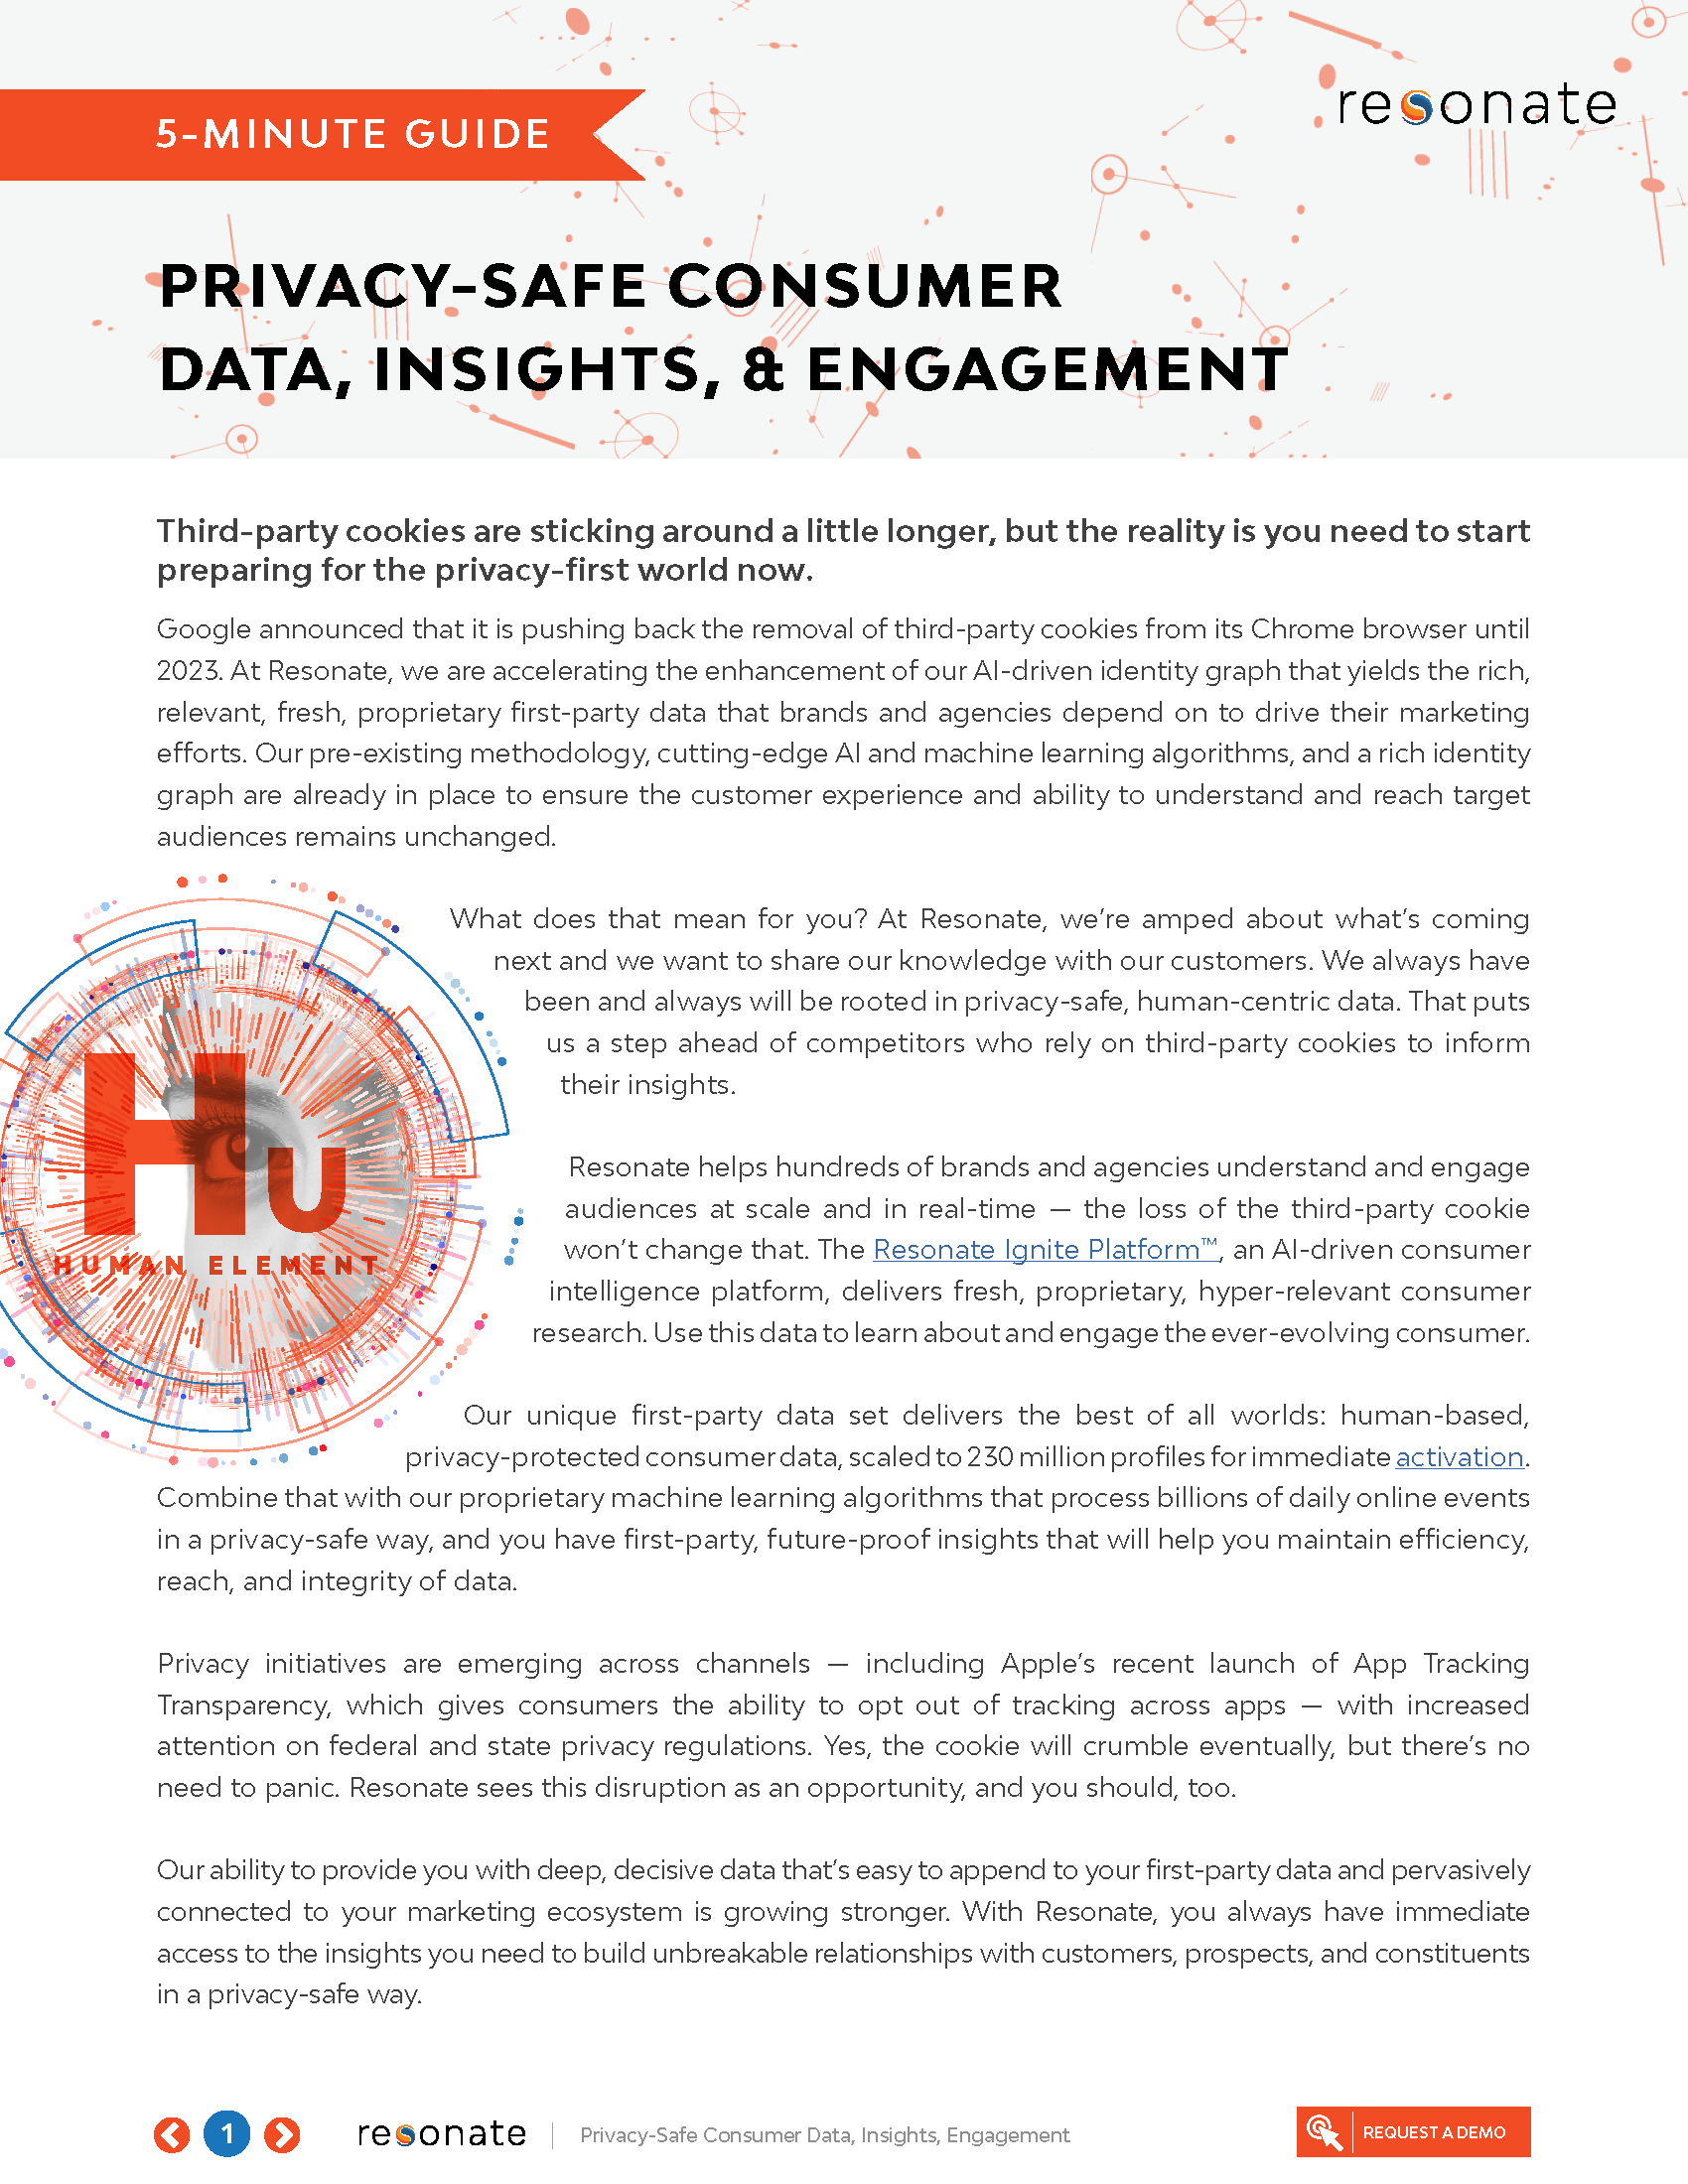 Resonate's 5-Minute Guide to Privacy-Safe Consumer Data, Insights, & Engagement